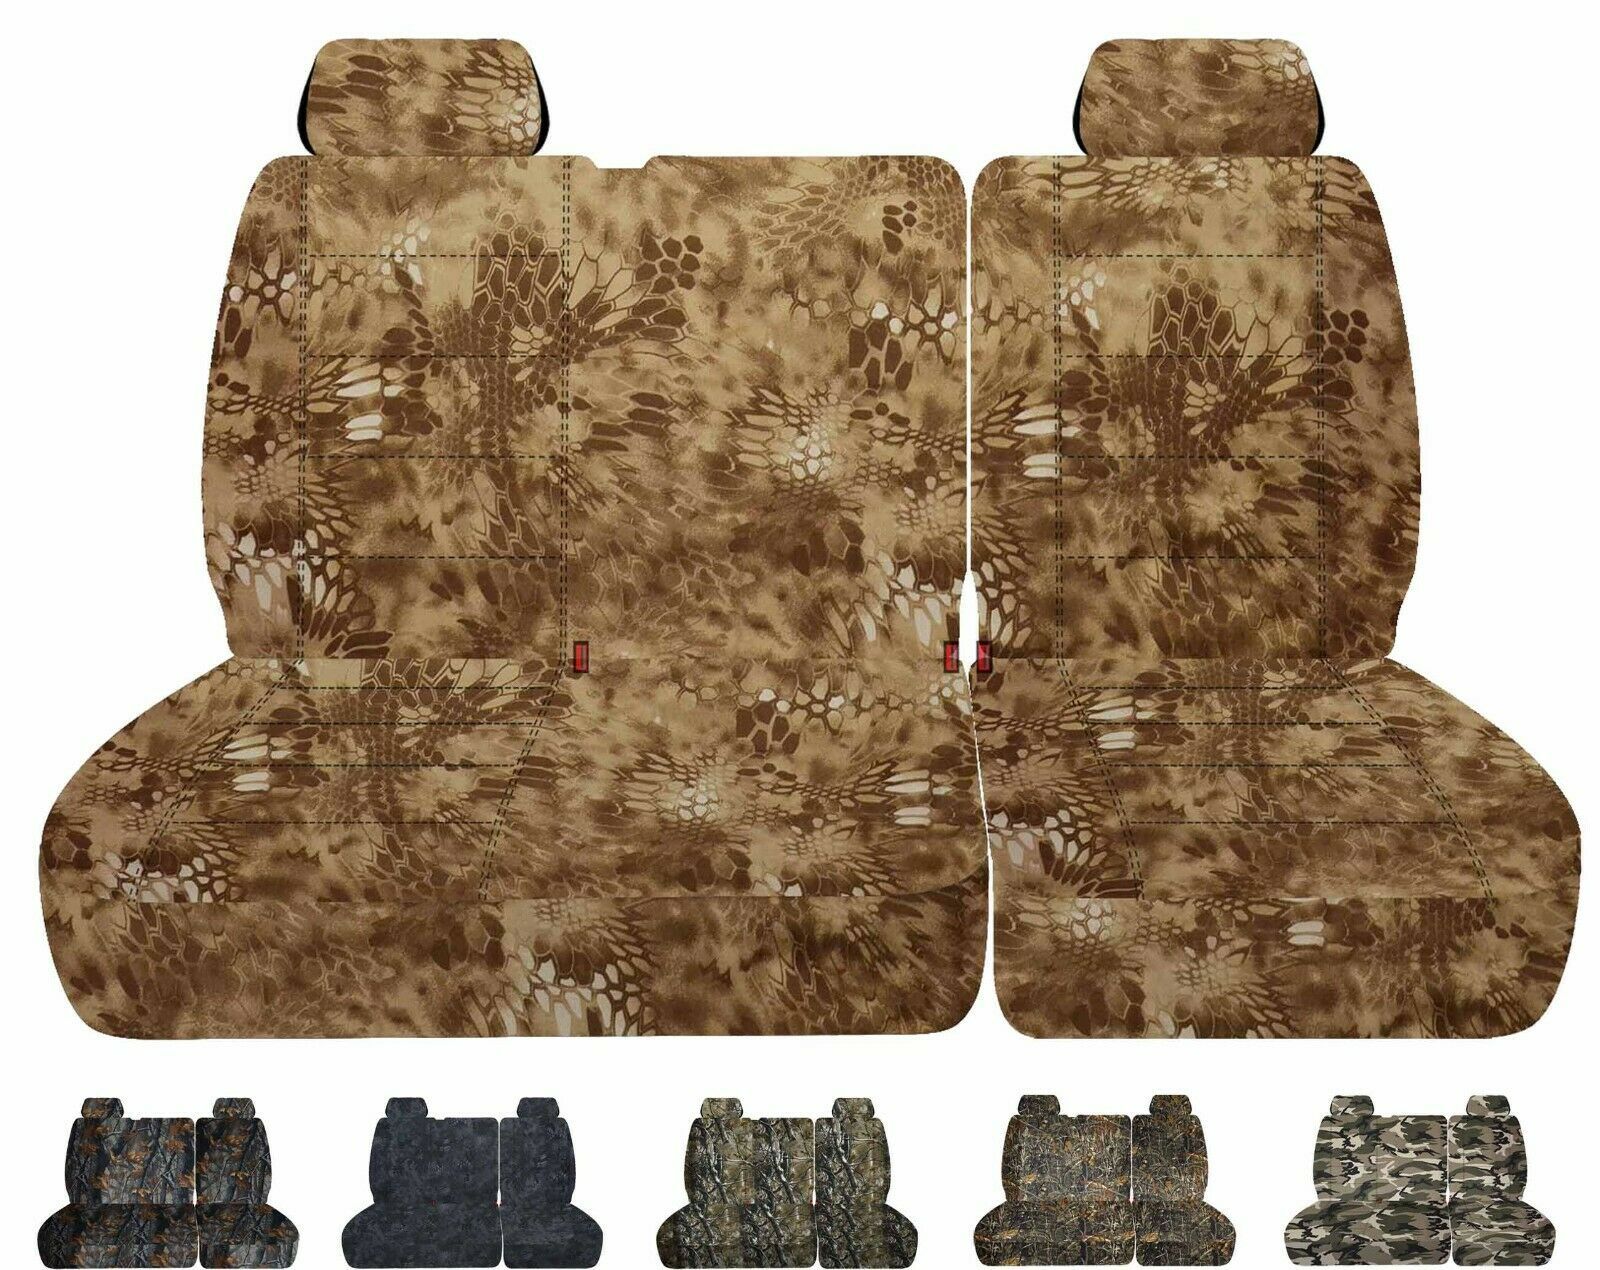 Primary image for 40/60 Front bench seat covers with headrests fits Chevy C/K 1500 Pickup 1988-94